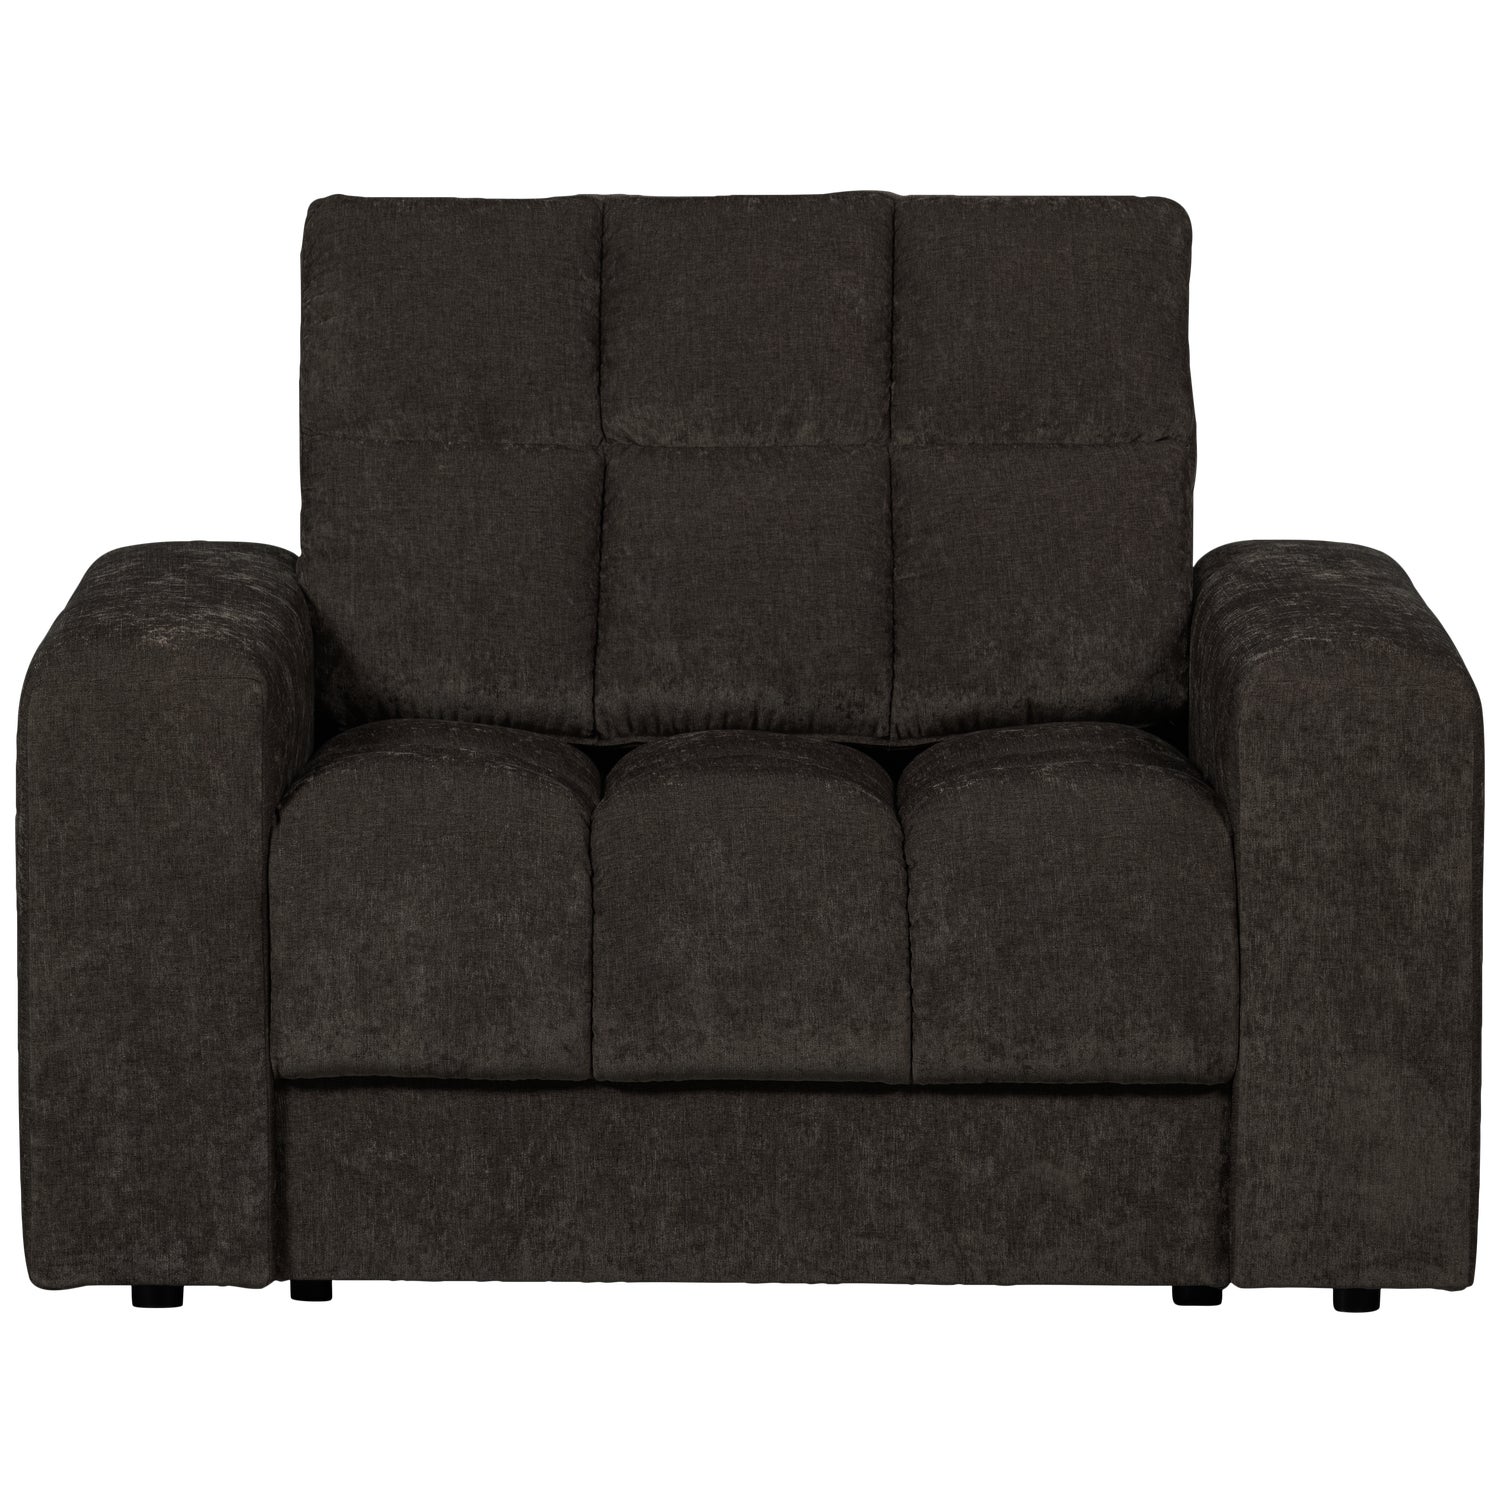 379003-A-01_VS_WE_Second_date_fauteuil_vintage_antraciet.png?auto=webp&format=png&width=1500&height=1500